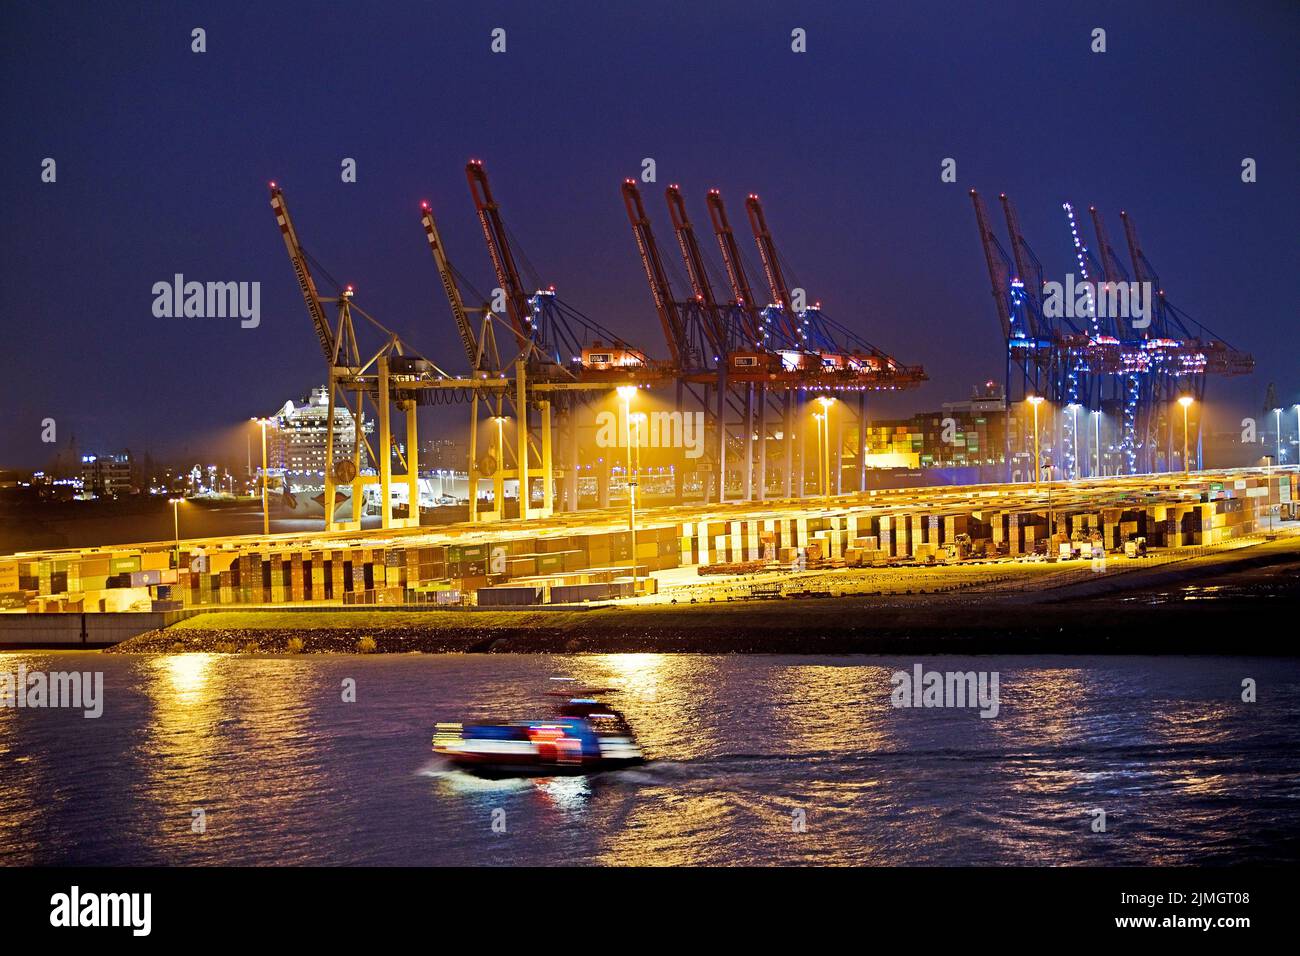 Loading cranes at the container terminal in Tollerort in the evening, Port of Hamburg, Germany Stock Photo